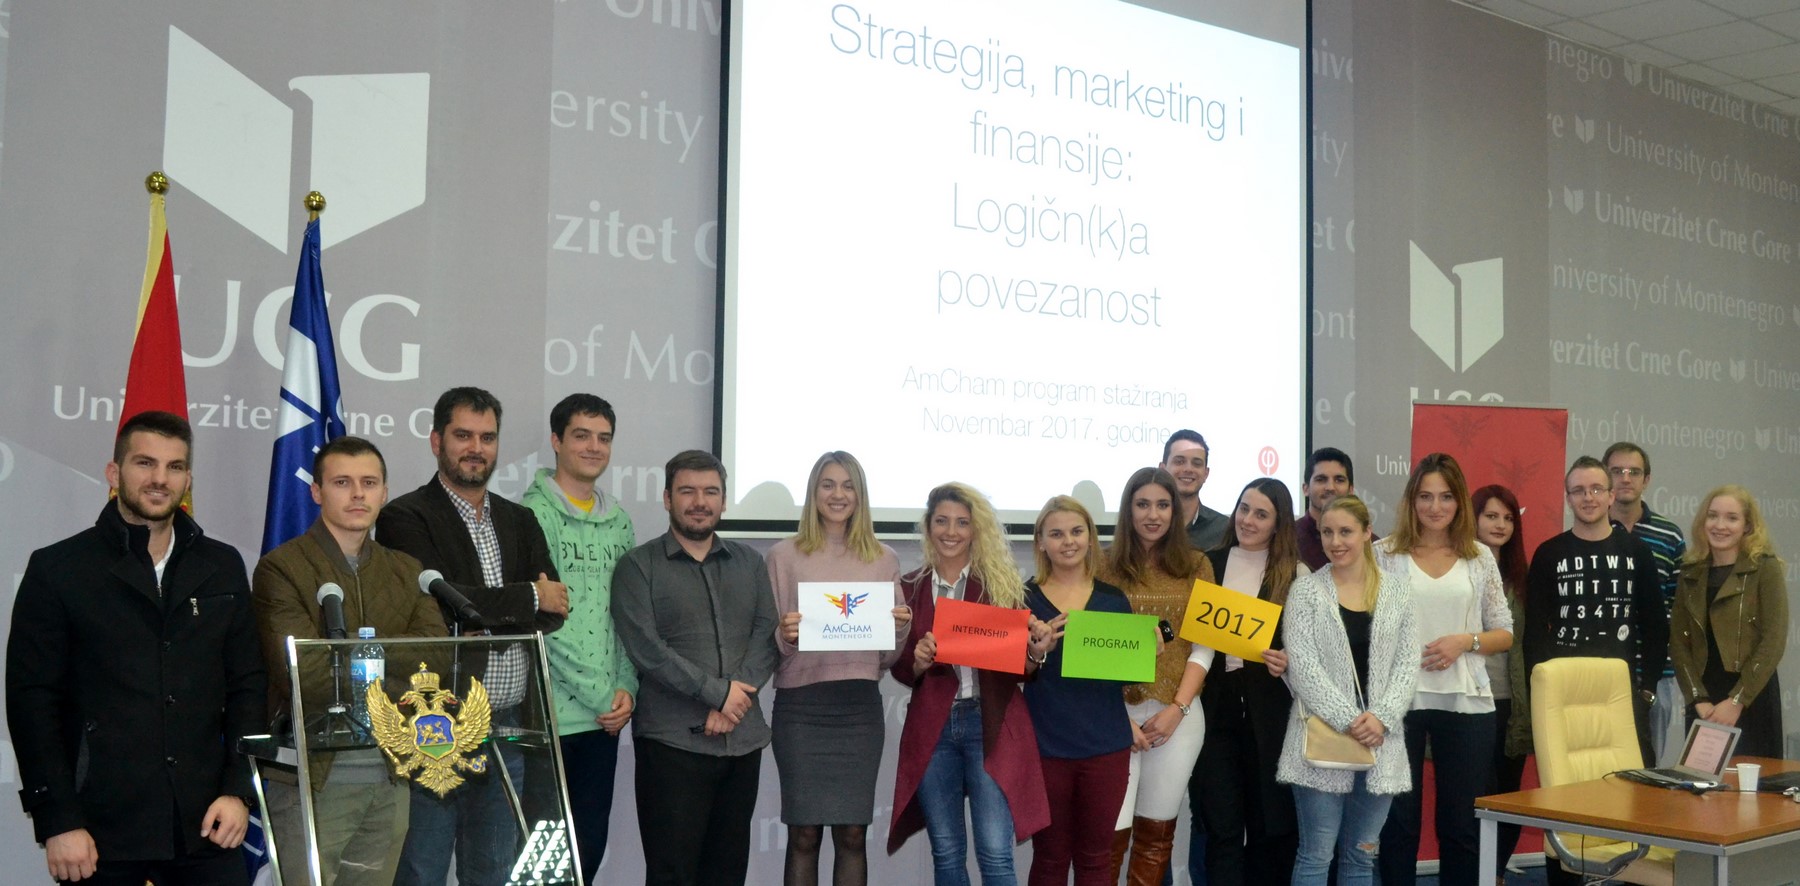 AmCham Interns Learned about ”Strategies, finances and marketing: logical connection’’